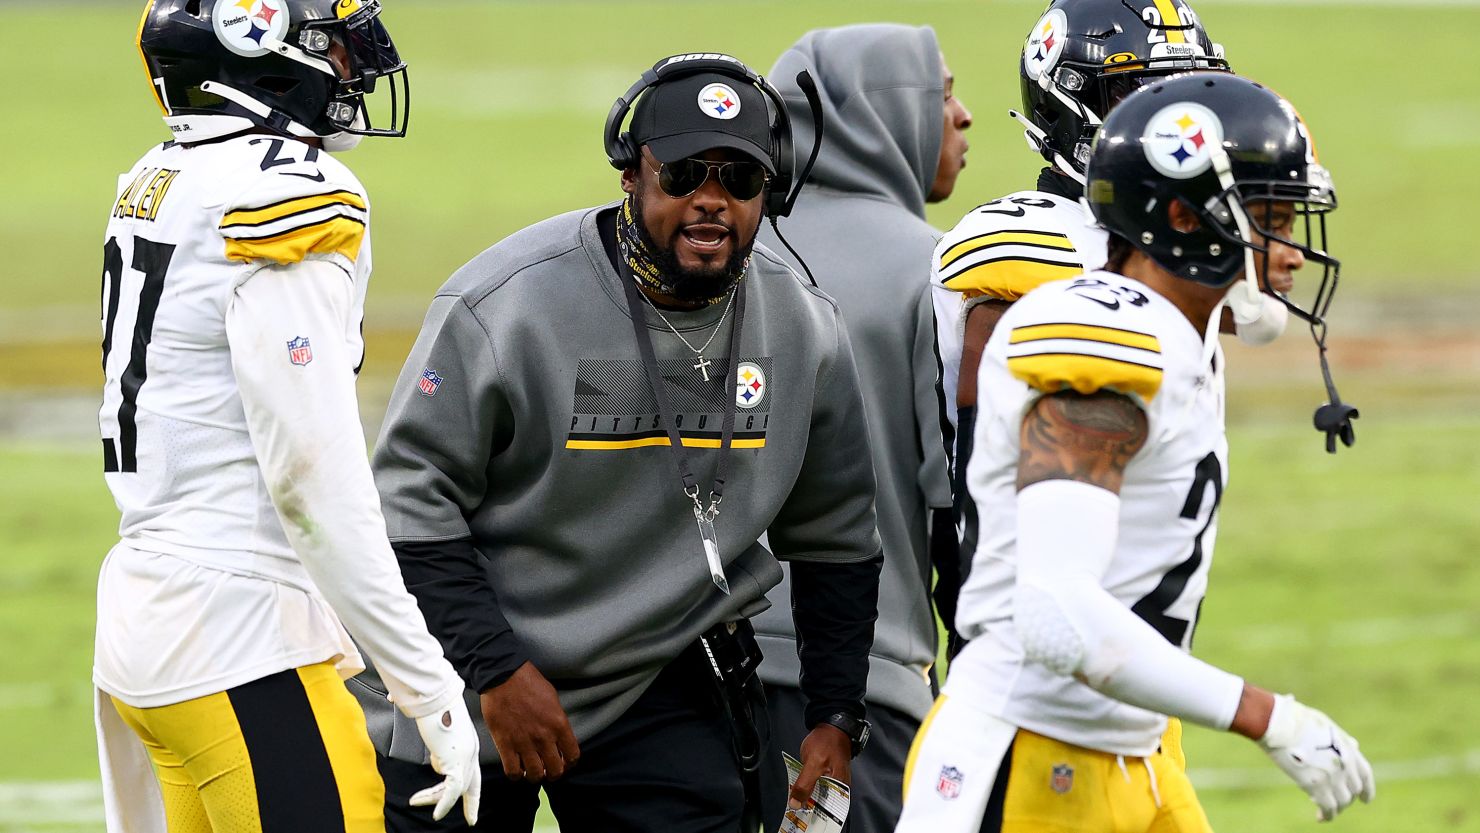 Steelers head coach Mike Tomlin, shown coaching against the Baltimore Ravens at M&T Bank Stadium in Baltimore on November 1, 2020, was fined for violating Covid-19 protocols.

